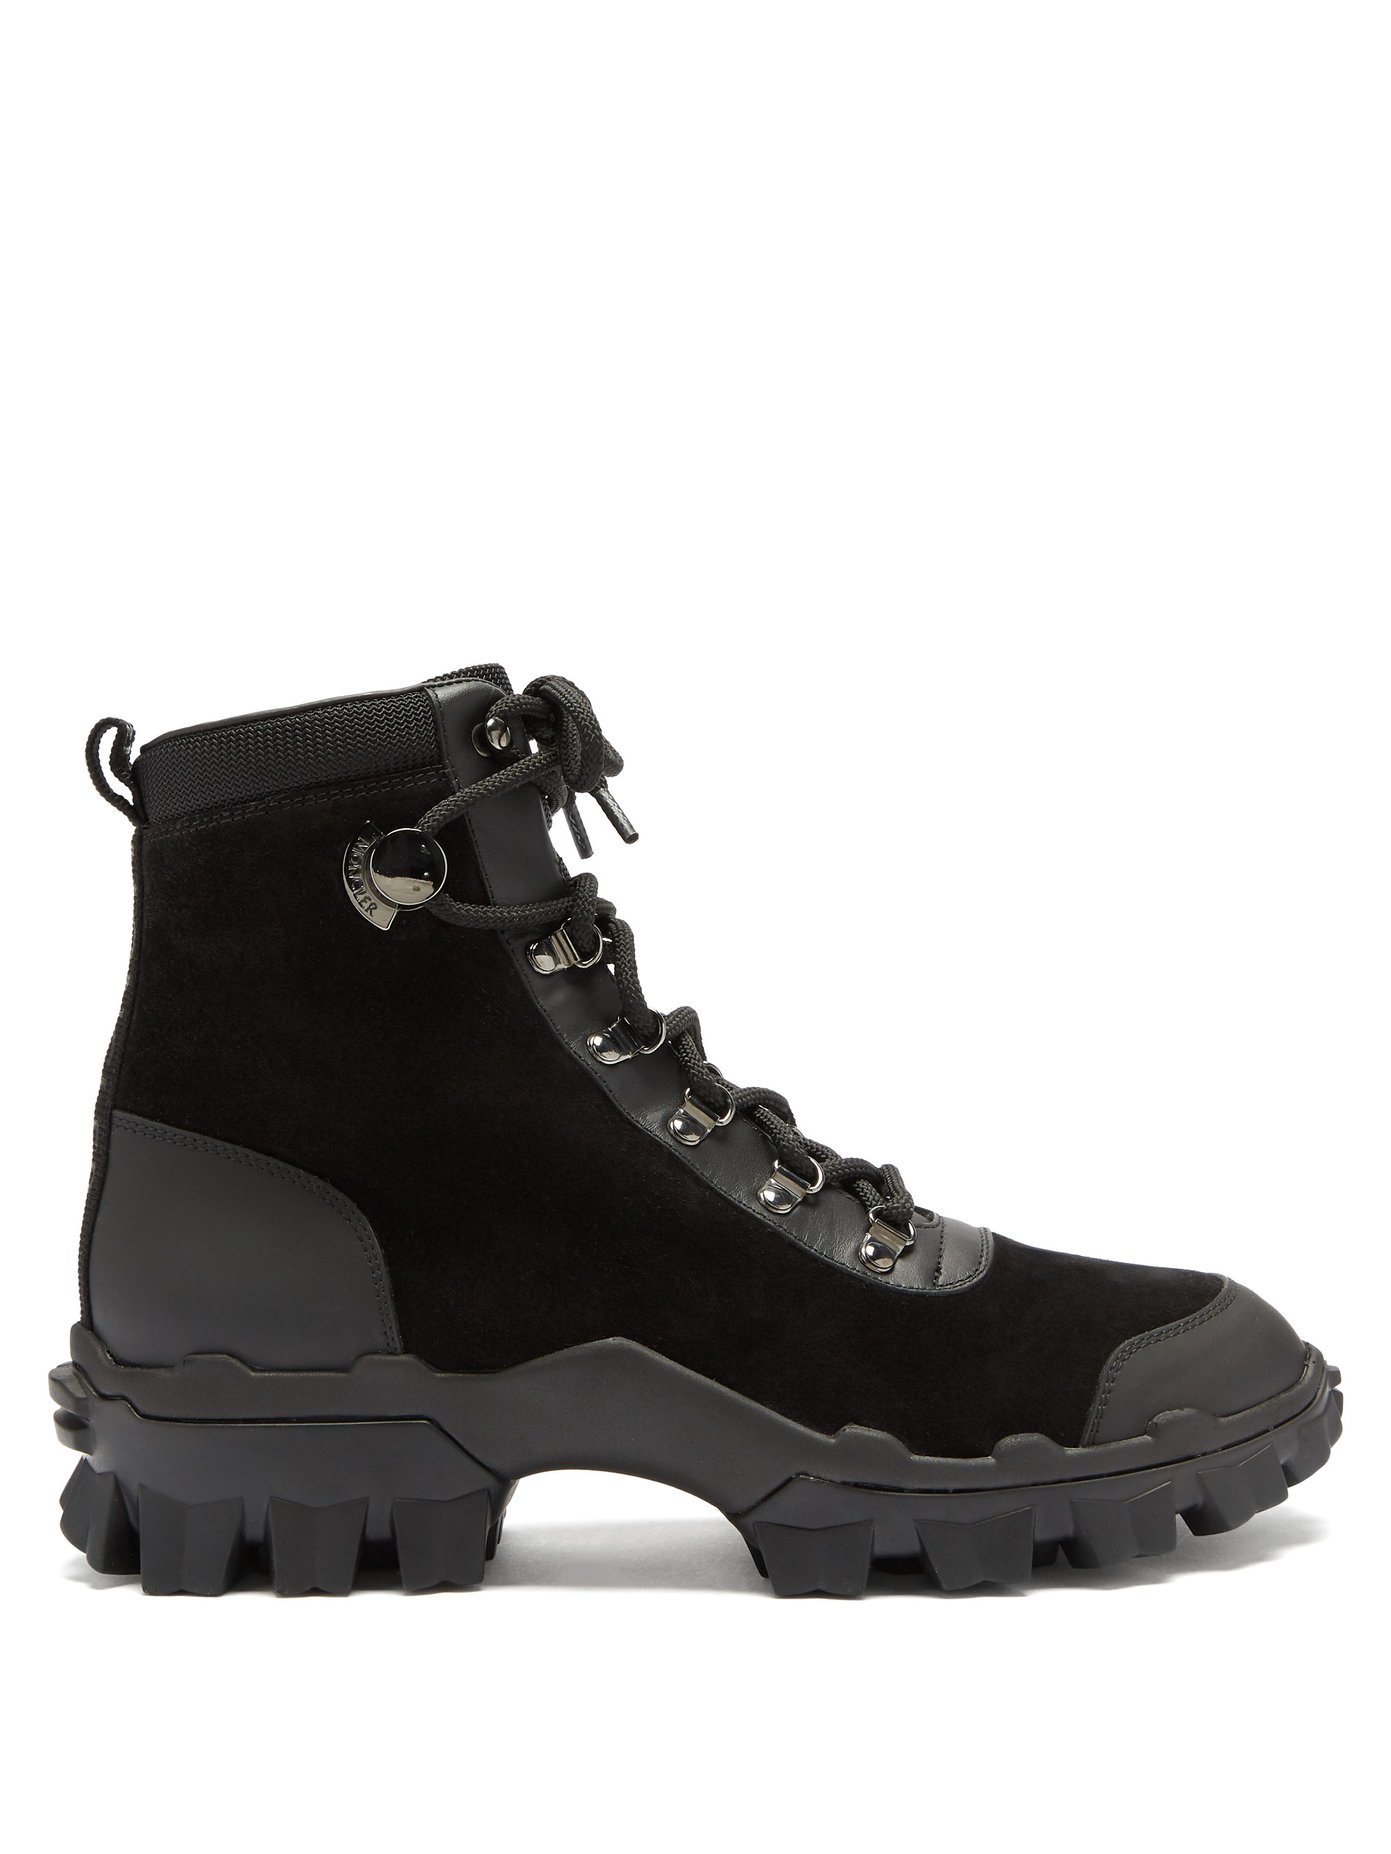 moncler suede boots